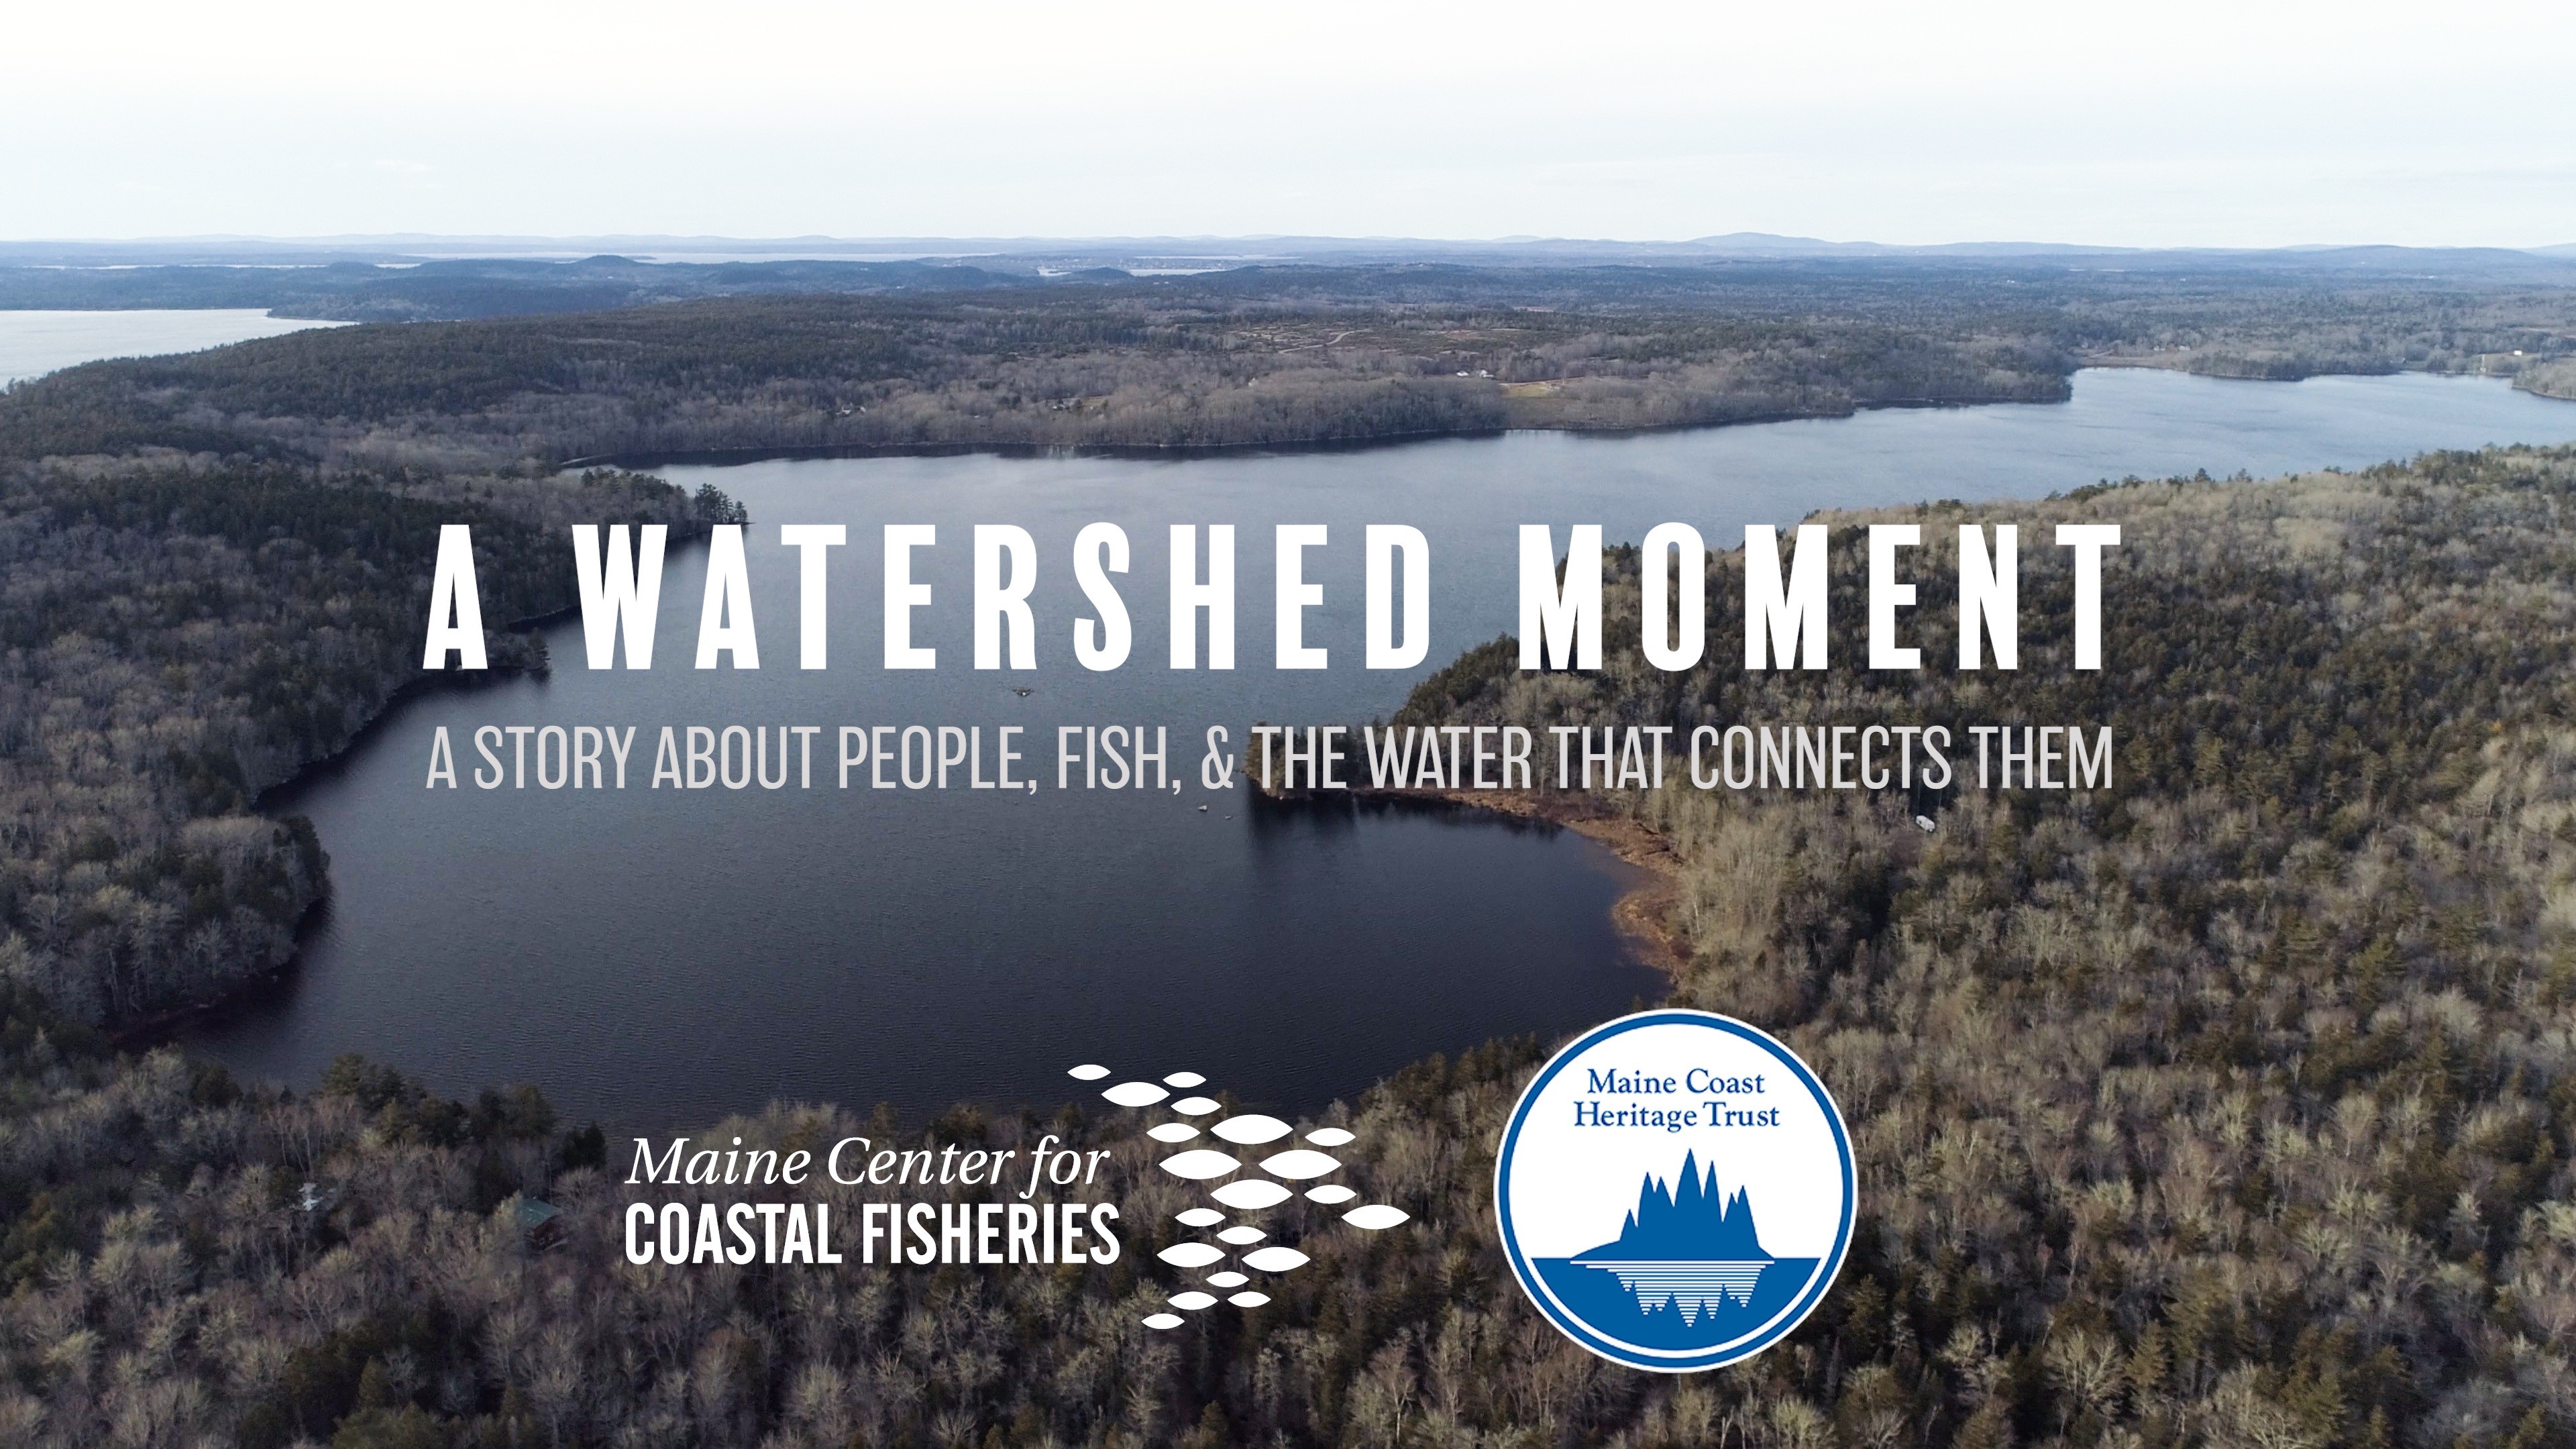 Launch of a film “A Watershed Moment: a story about people, fish, and the water that connects them”